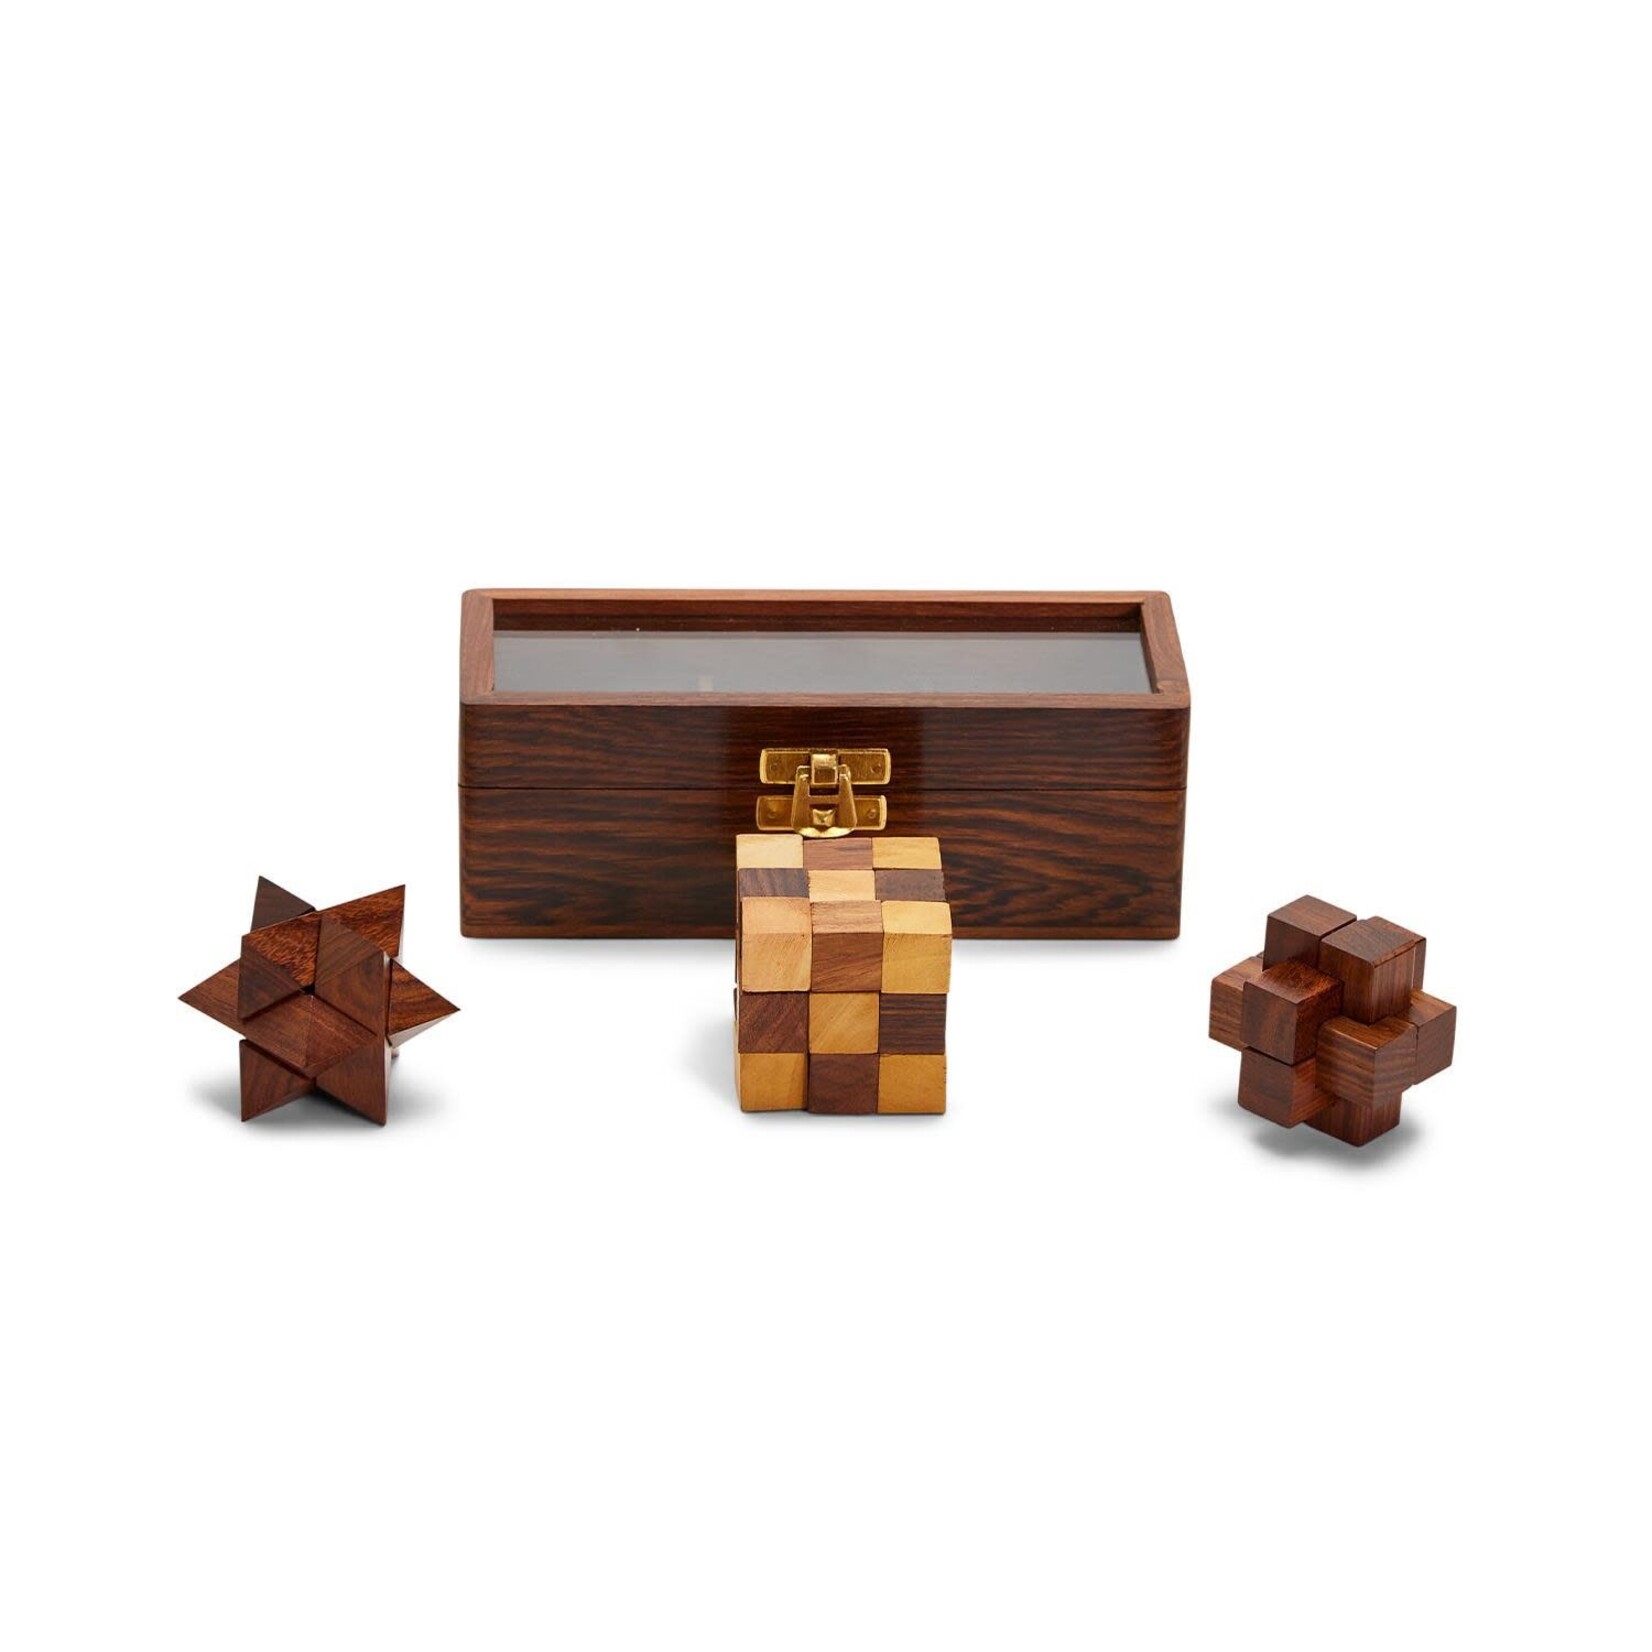 TWOS COMPANY WOOD CRAFTED PUZZLES IN STORAGE BOX